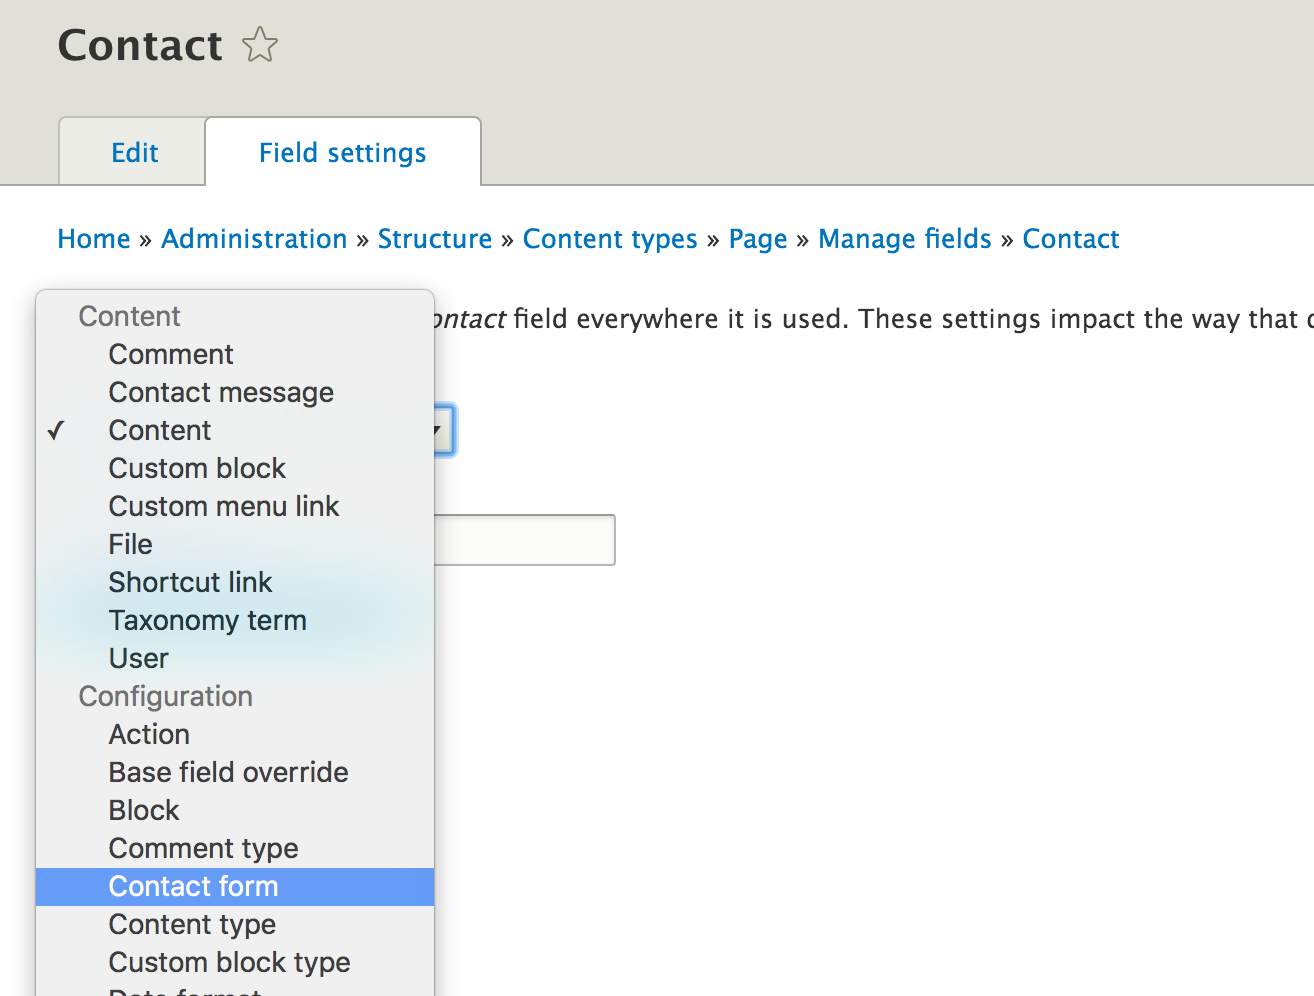 Step3: select the contact form entity to be referenced